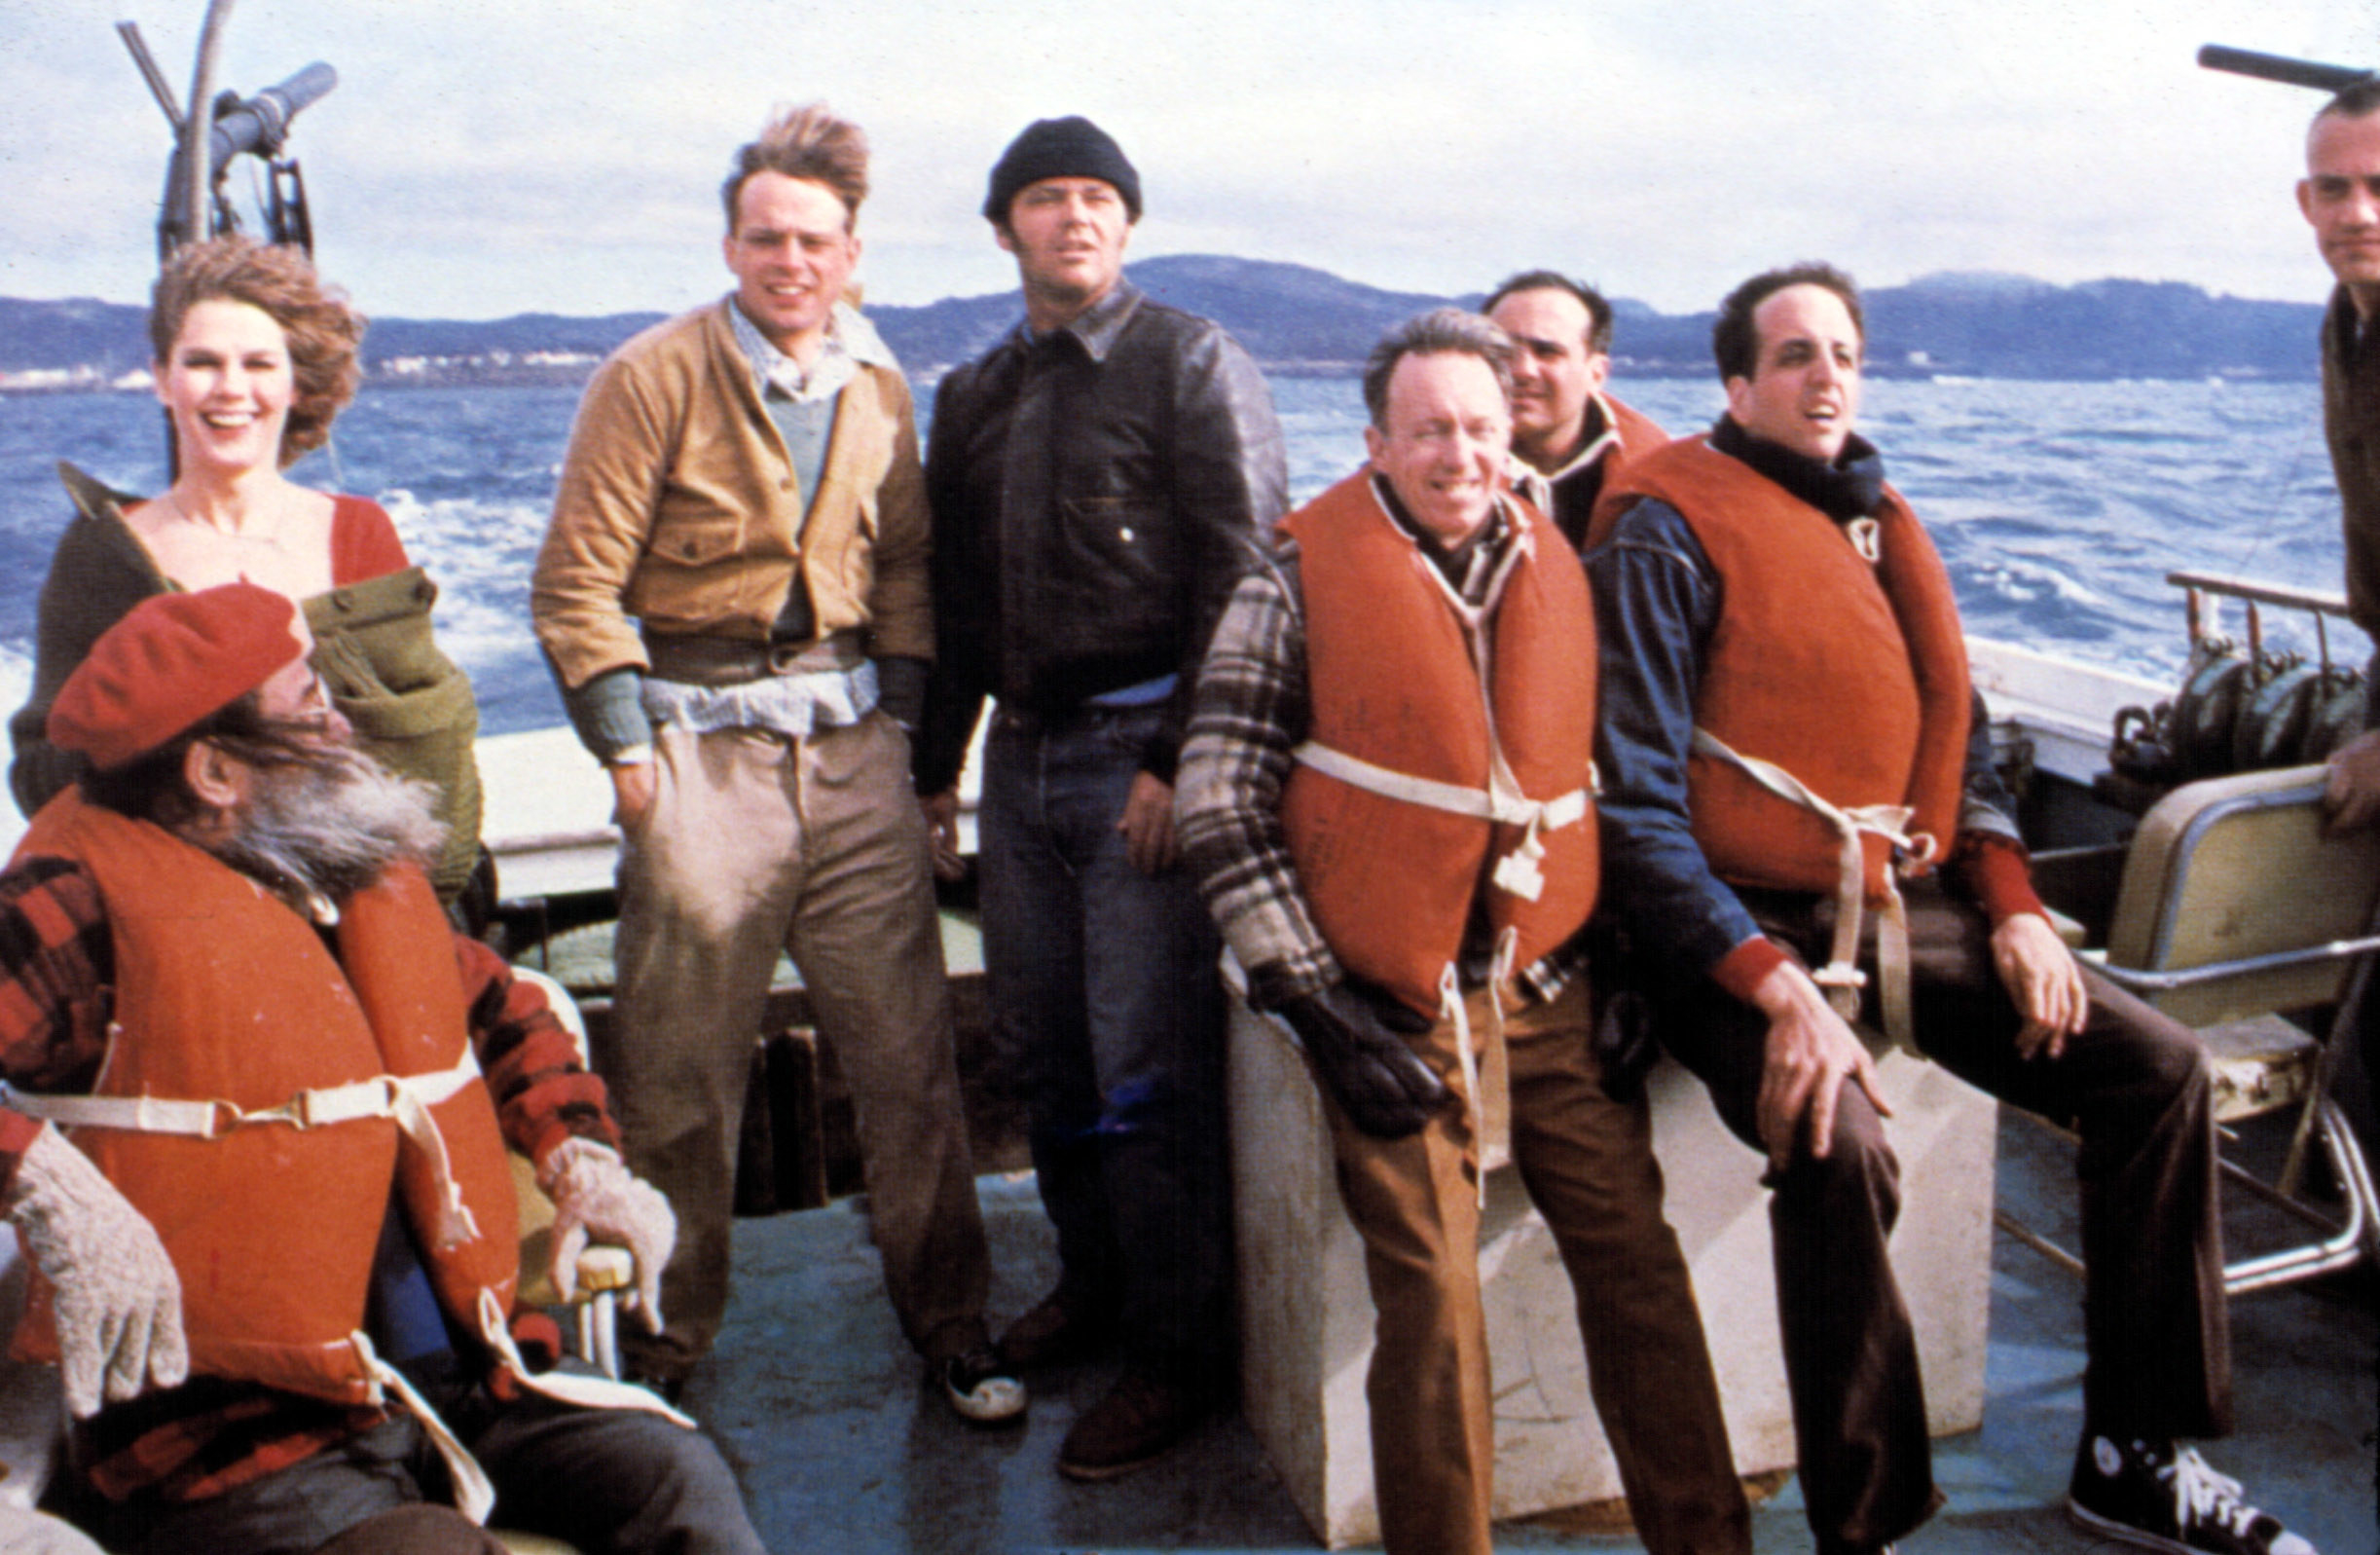 McMurphy with the other patients on a fishing boat